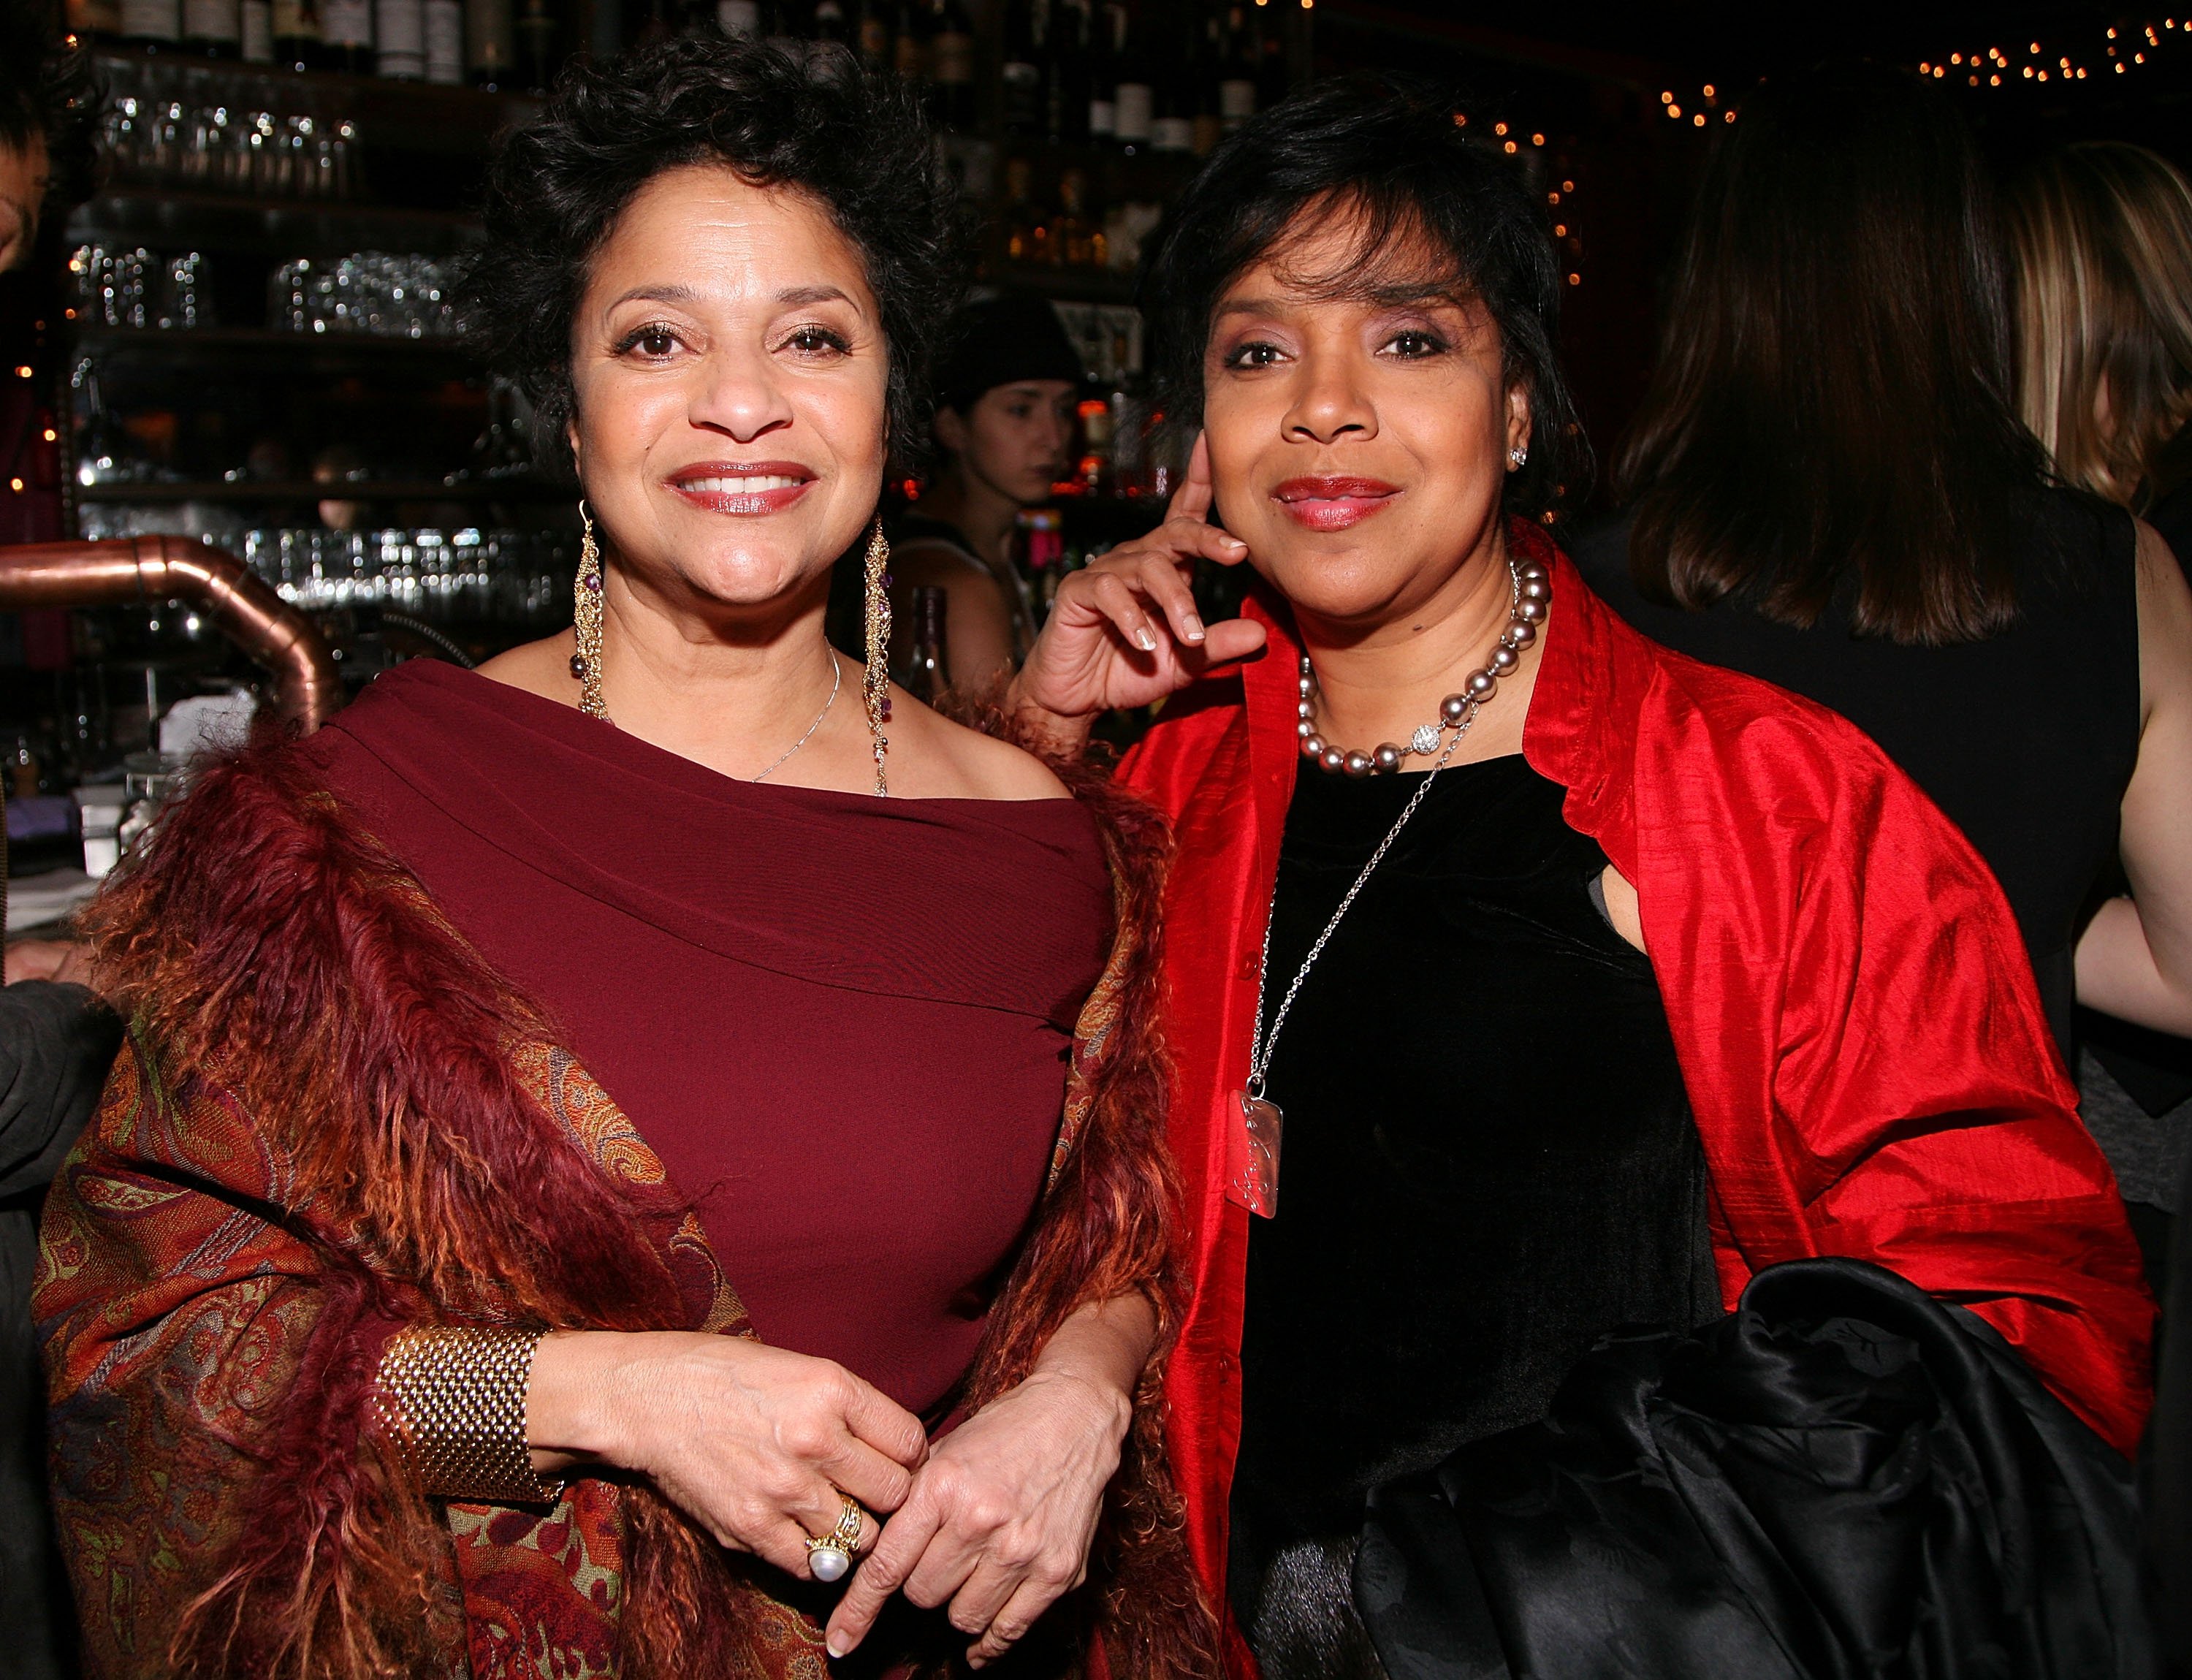 Debbie Allen and Phylicia Rashad pictured at the New York Magazine Oscar Viewing Party on February 24, 2008 in New York City. | Source: Getty Images